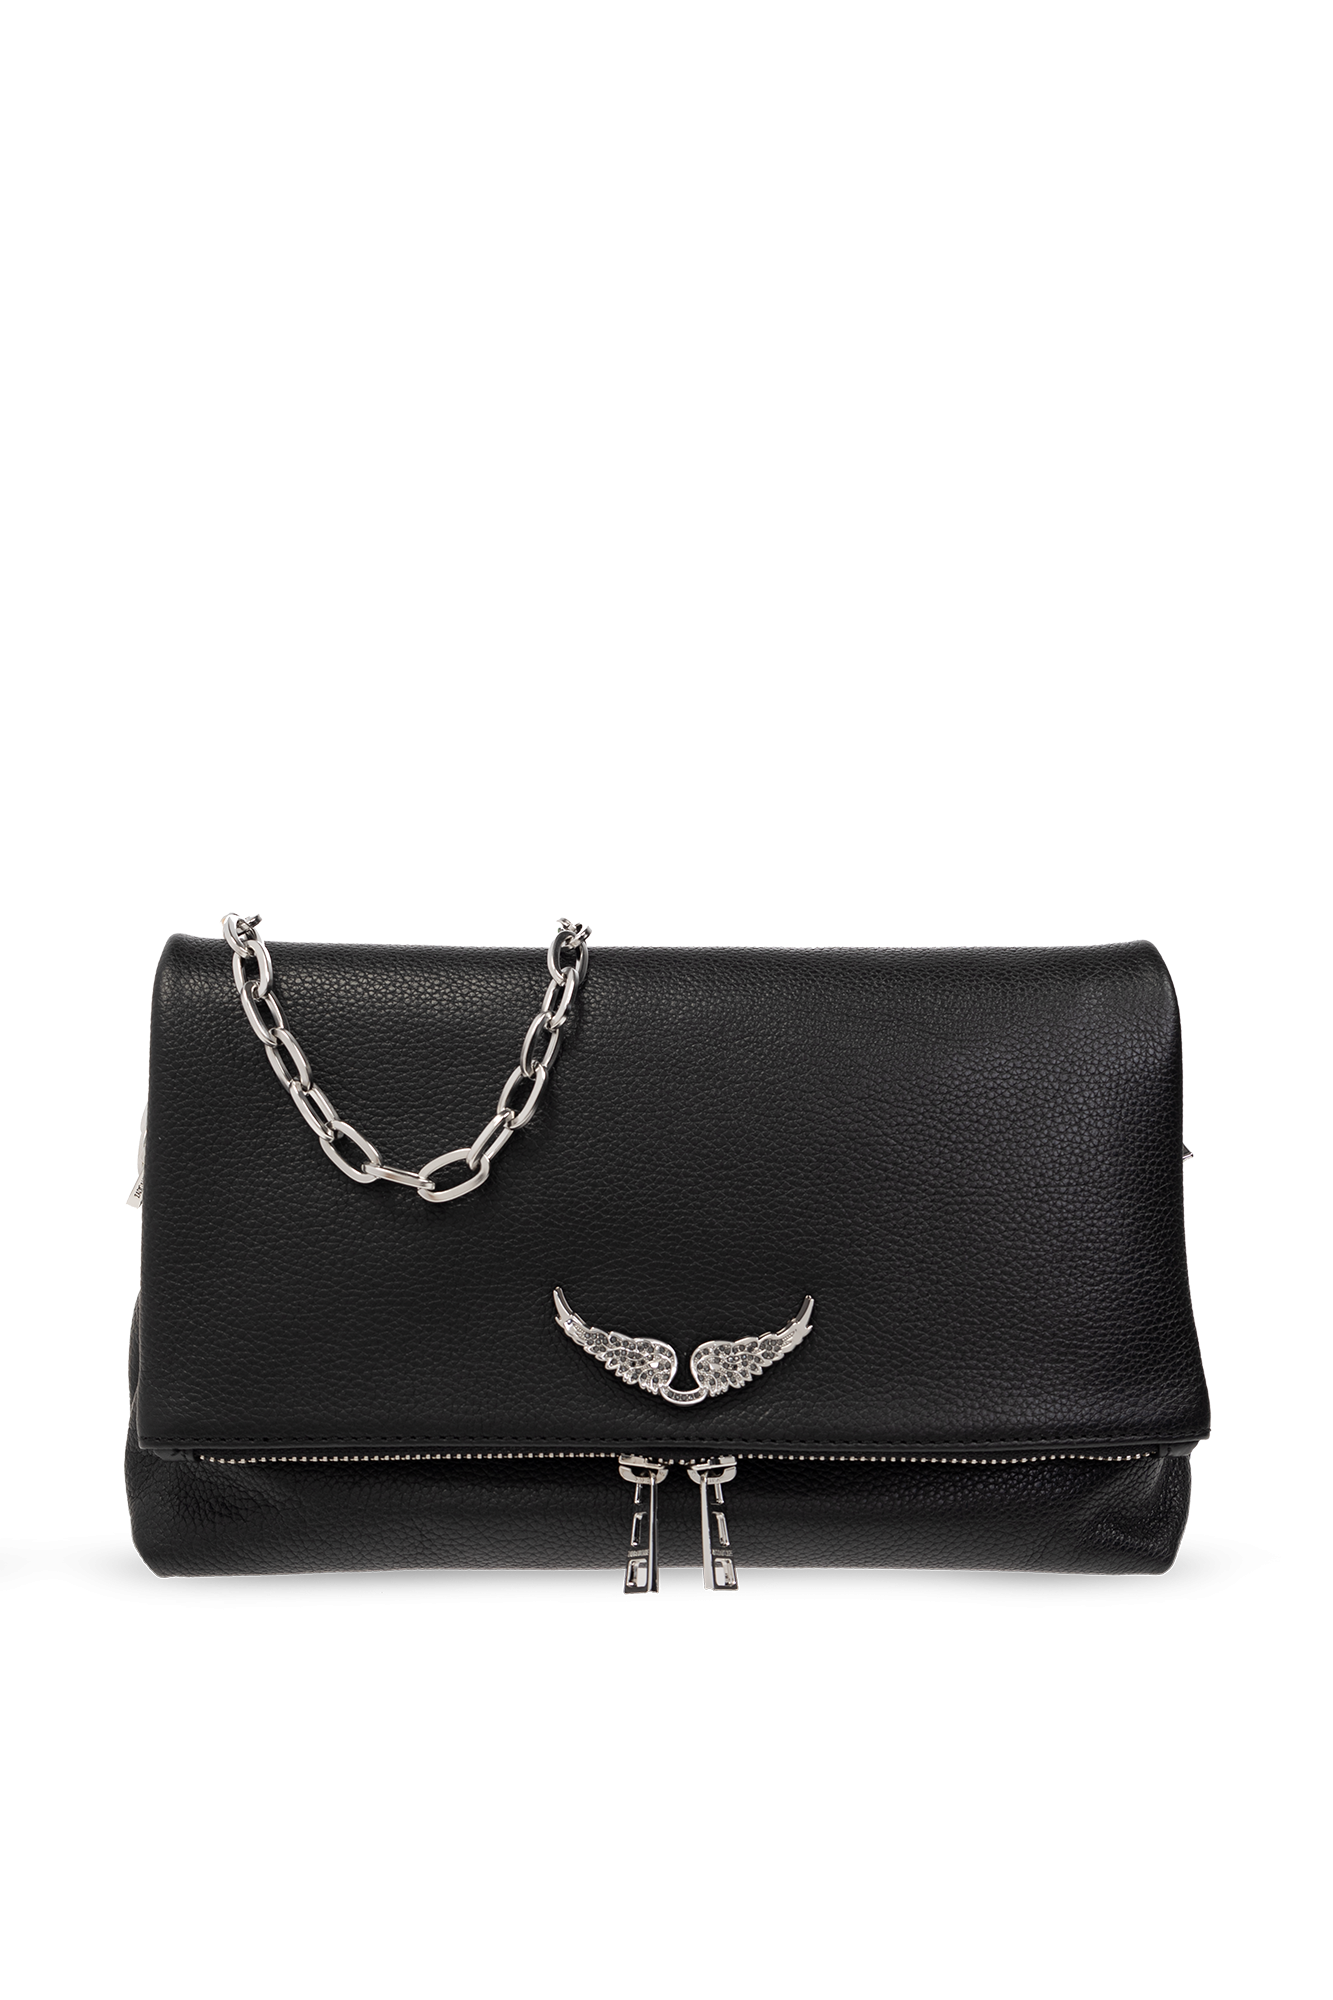 Noir Rocky Grained Bag by Zadig & Voltaire Handbags for $20